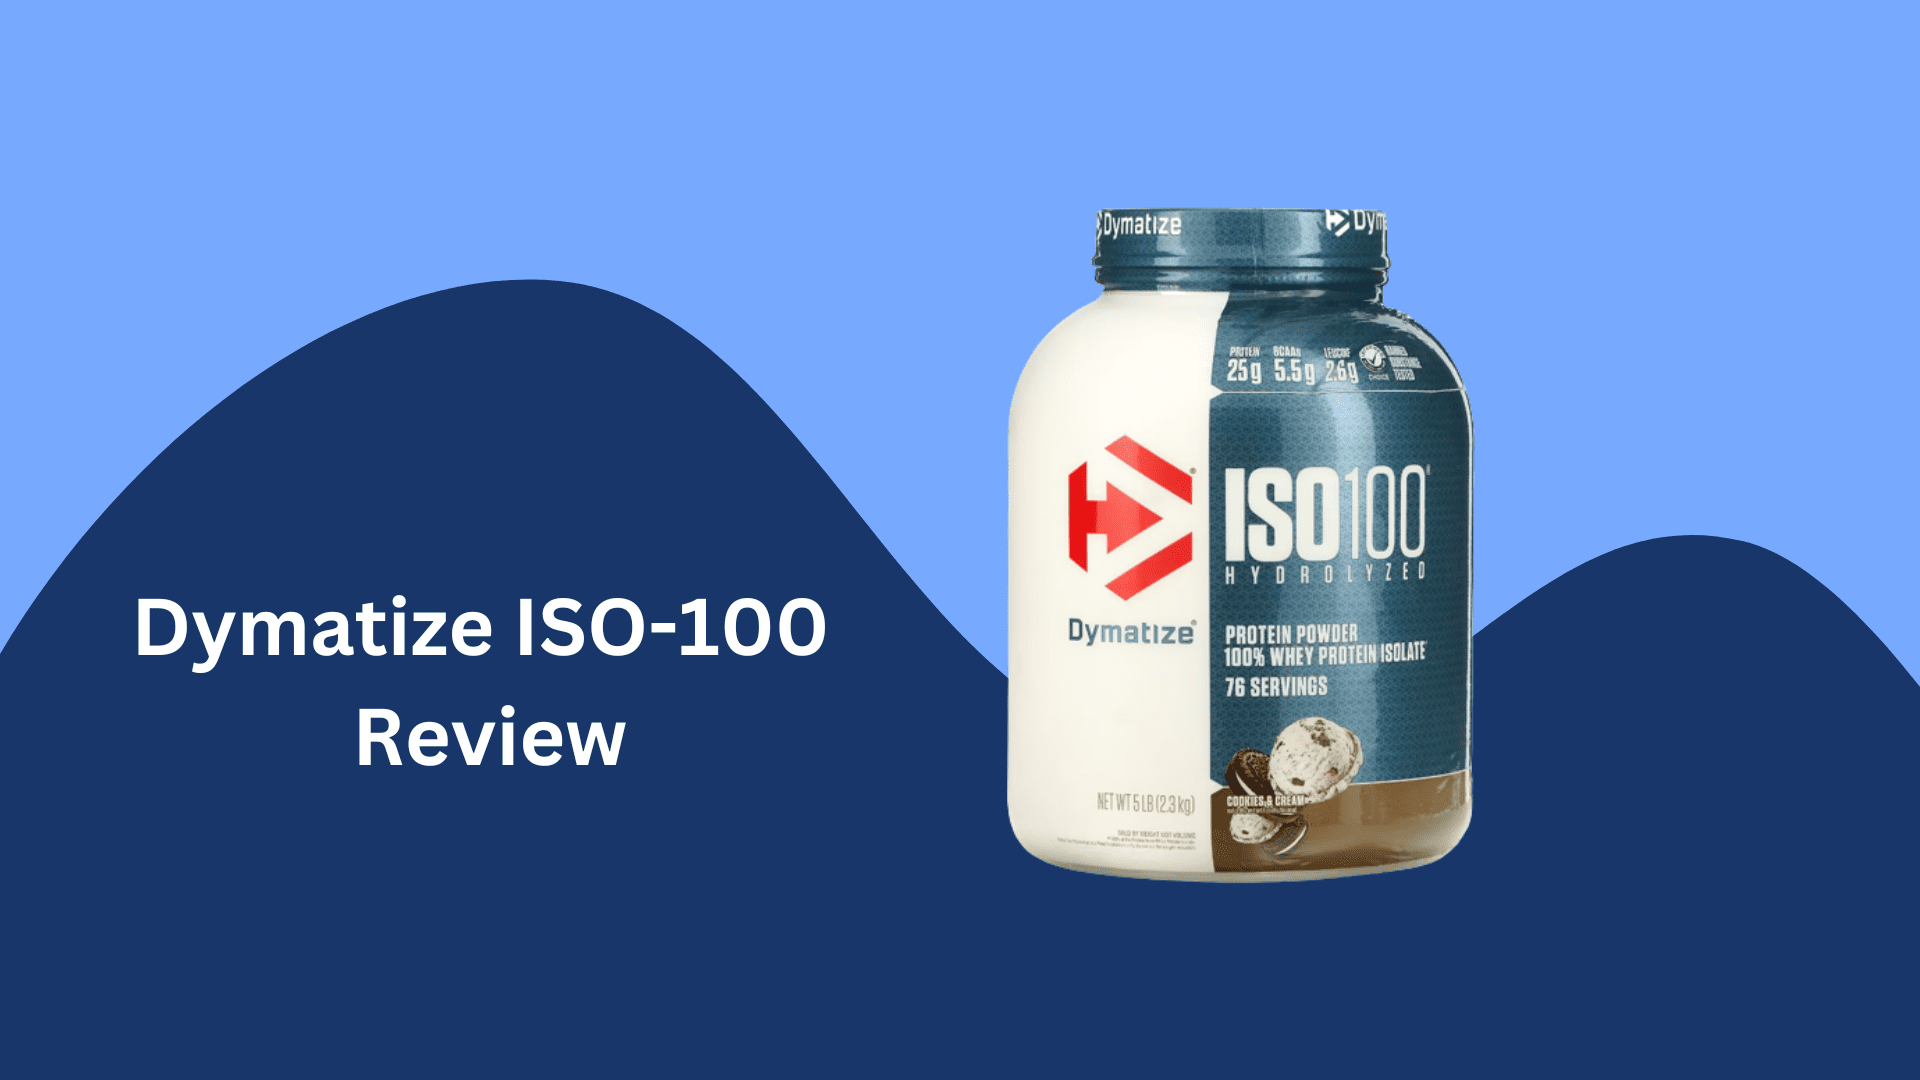 Dymatize Iso protein powder in the right